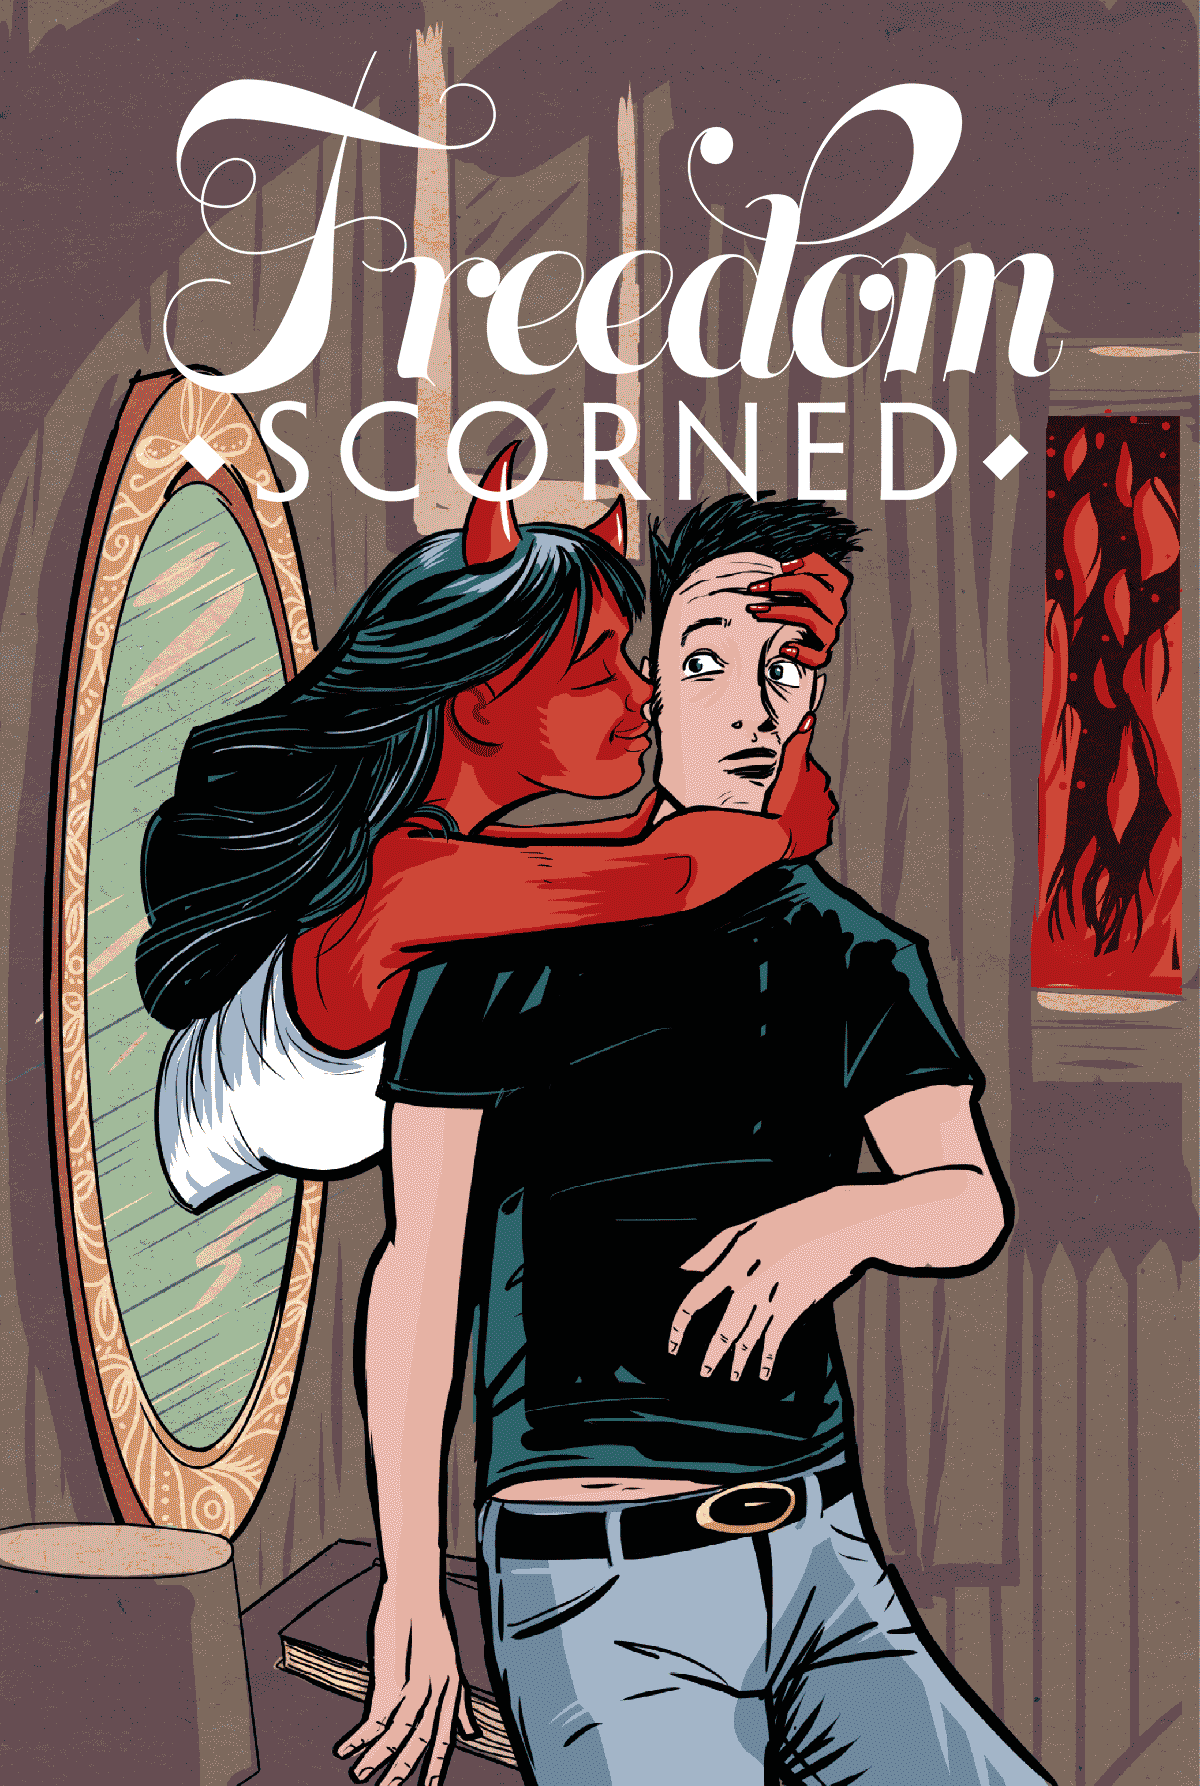 Freedom Scorned Collected issues 1-4